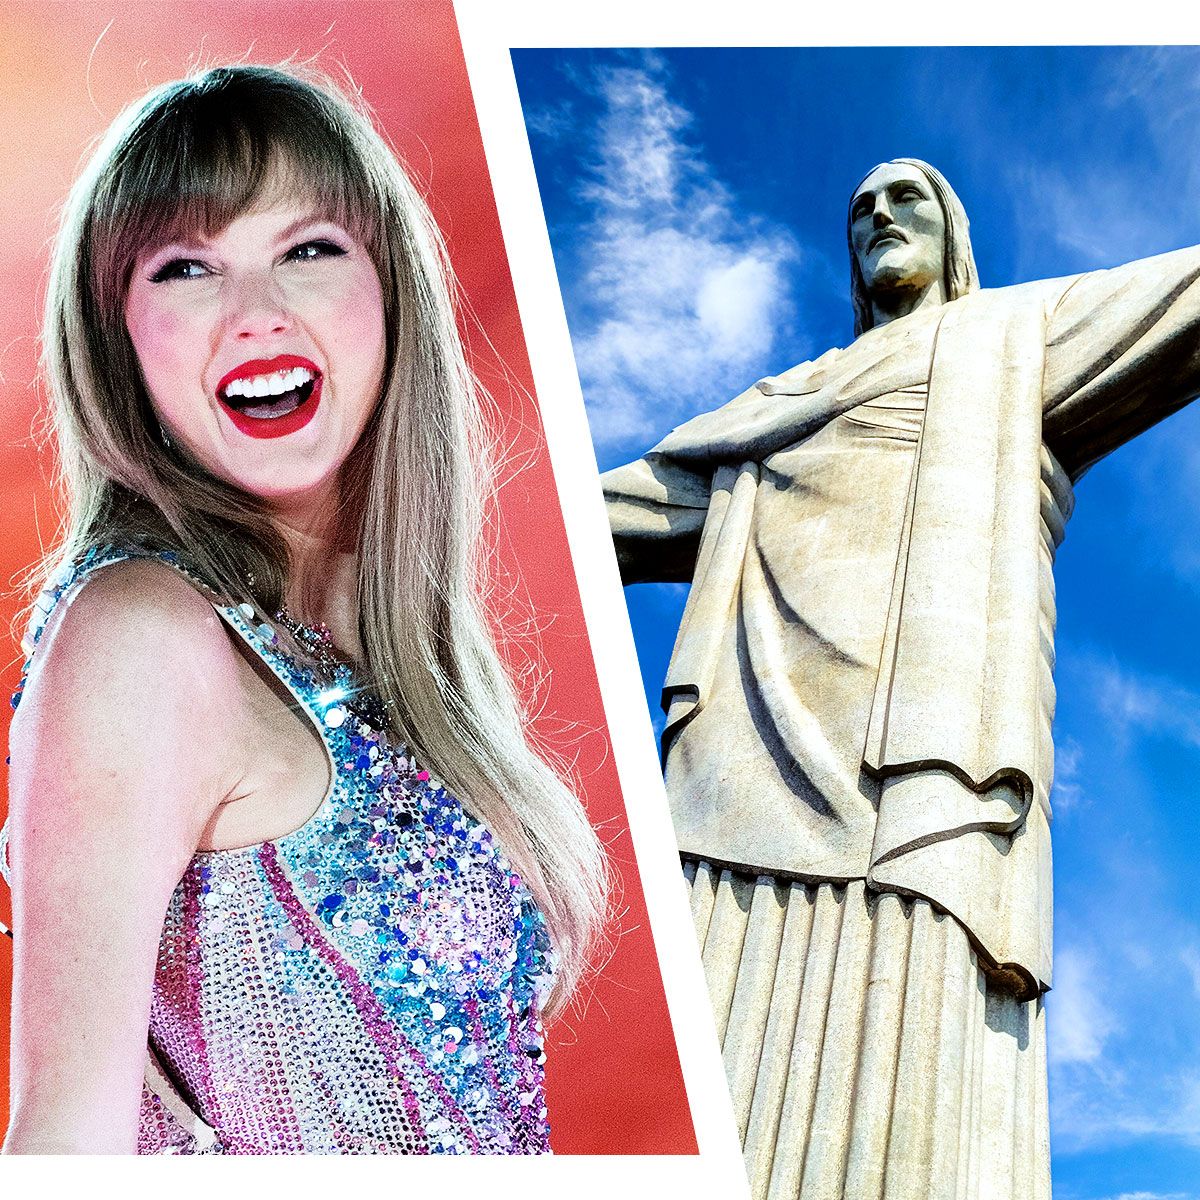 Taylor Swift Fans Want to Decorate Jesus Statue in Brazil